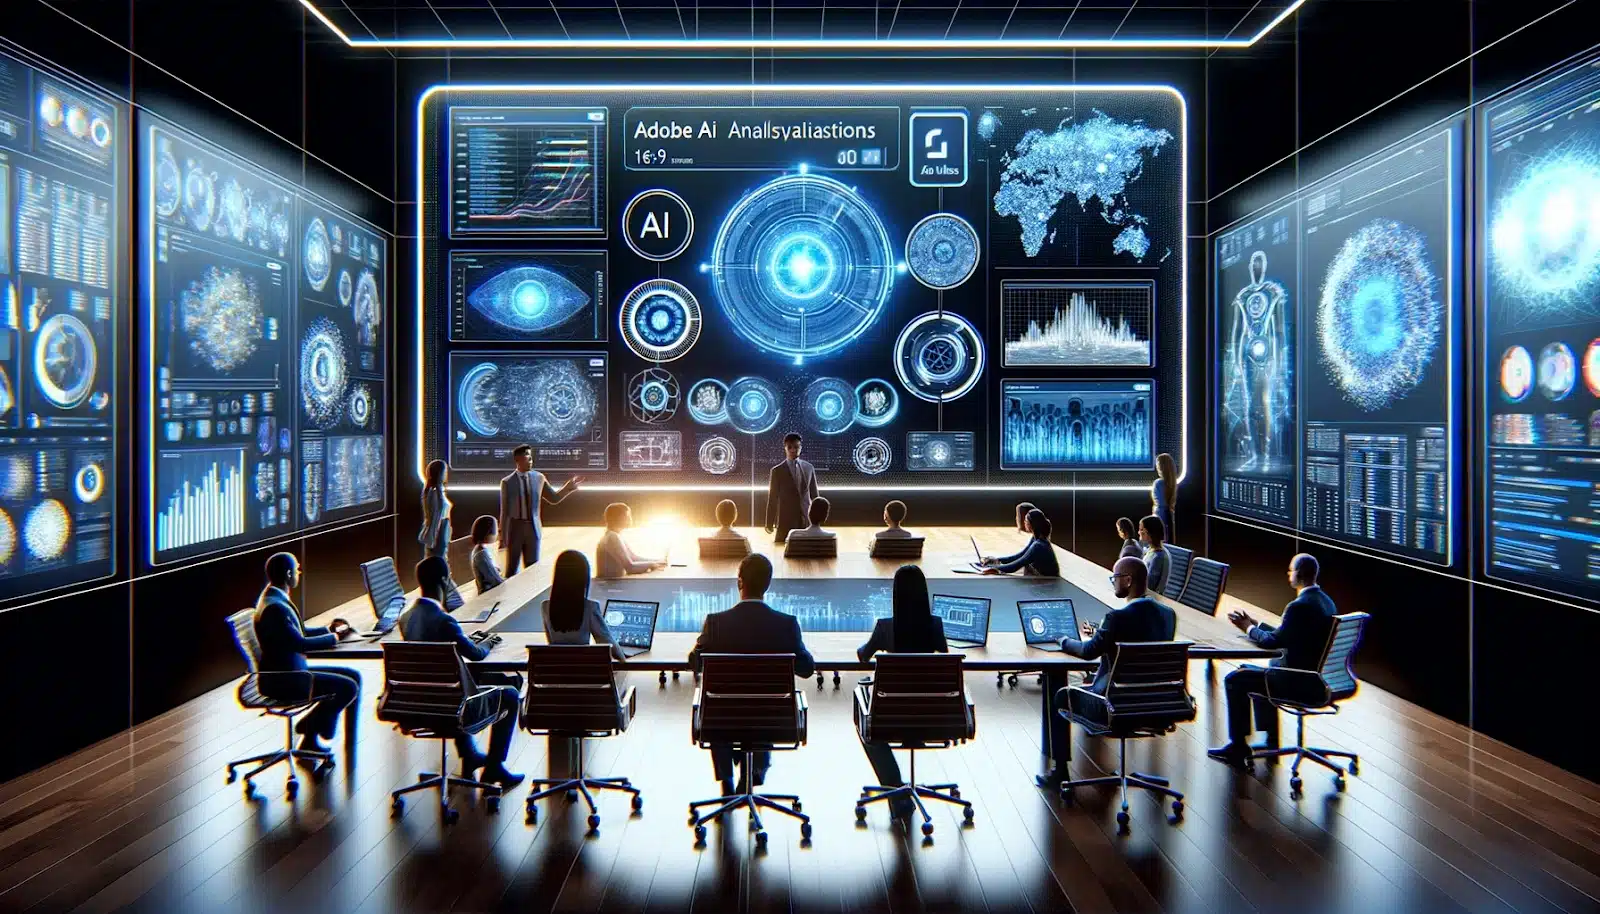 Advanced conference room with professionals using Adobe AI for data analysis, featuring futuristic technology and holographic data projections